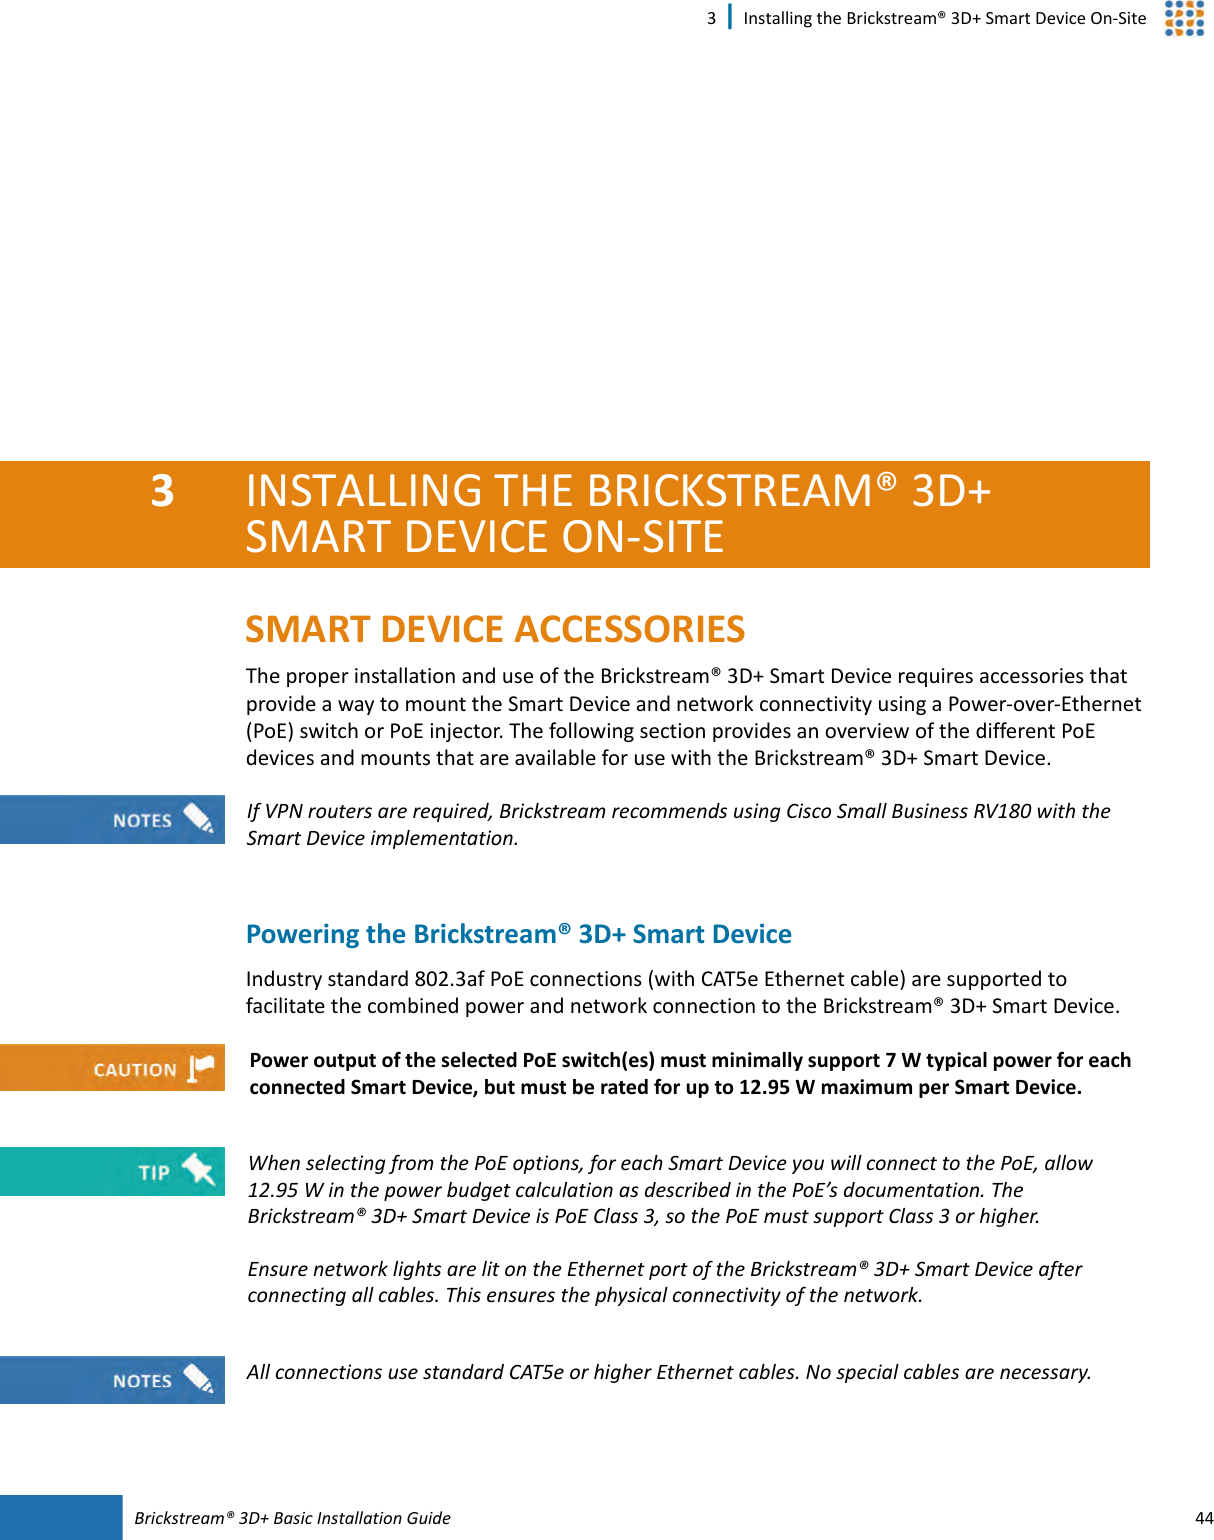 Brickstream®  3D+ Basic Installation Guide 443 | Installing the Brickstream® 3D+ Smart Device On-Site3INSTALLING THE BRICKSTREAM®  3D+ SMART  DEVICE ON-SITESMART  DEVICE ACCESSORIESThe proper installation and use of the Brickstream® 3D+ Smart  Device requires accessories that provide a way to mount the Smart  Device and network connectivity using a Power-over-Ethernet (PoE) switch or PoE injector. The following section provides an overview of the different PoE devices and mounts that are available for use with the Brickstream® 3D+ Smart Device.Powering the Brickstream®  3D+ Smart  DeviceIndustry standard 802.3af PoE connections (with CAT5e Ethernet cable) are supported to facilitate the combined power and network connection to the Brickstream® 3D+ Smart Device.If VPN routers are required, Brickstream recommends using Cisco Small Business RV180 with the Smart Device implementation.Power output of the selected PoE switch(es) must minimally support 7 W typical power for each connected Smart  Device, but must be rated for up to 12.95  W maximum per Smart Device.When selecting from the PoE options, for each Smart  Device you will connect to the PoE, allow 12.95  W in the power budget calculation as described in the PoE’s documentation. The Brickstream® 3D+ Smart  Device is PoE Class 3, so the PoE must support Class 3 or higher.Ensure network lights are lit on the Ethernet port of the Brickstream® 3D+ Smart Device after connecting all cables. This ensures the physical connectivity of the network.All connections use standard CAT5e or higher Ethernet cables. No special cables are necessary.